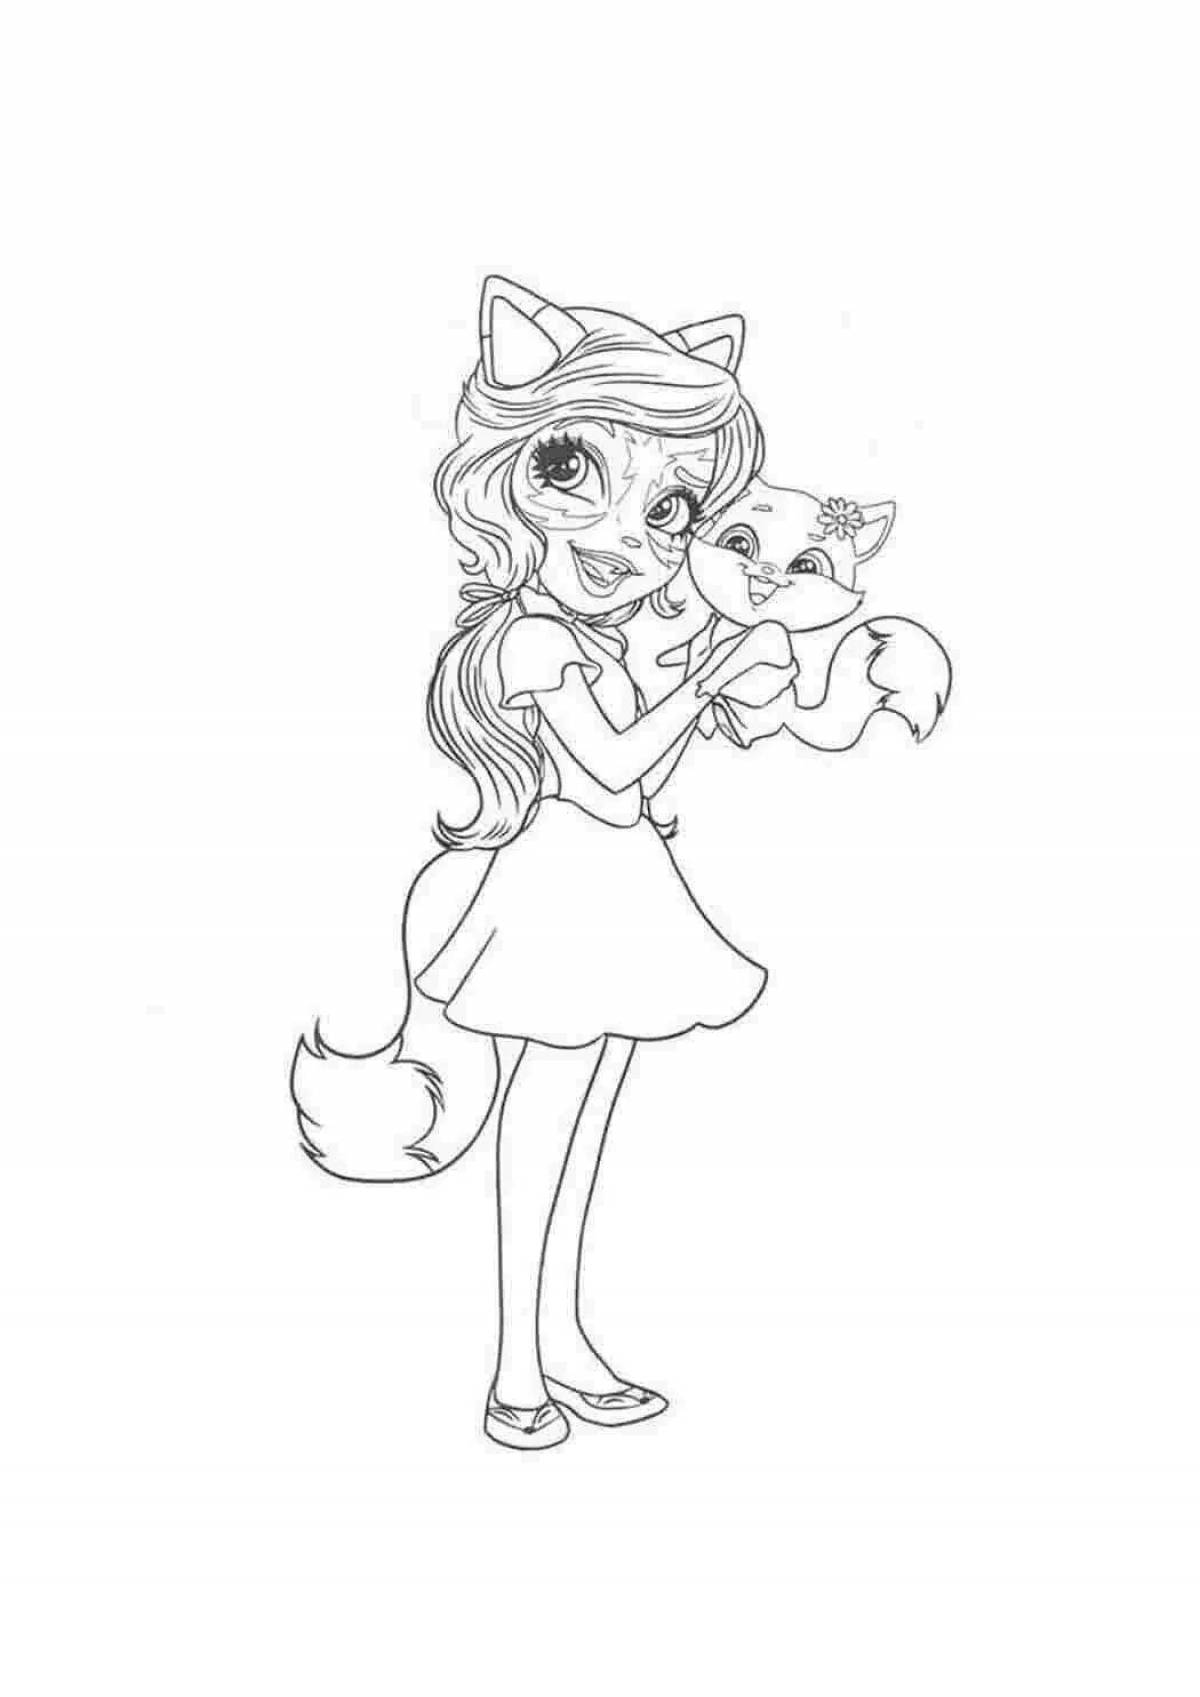 Sunny Felicity Kat coloring page